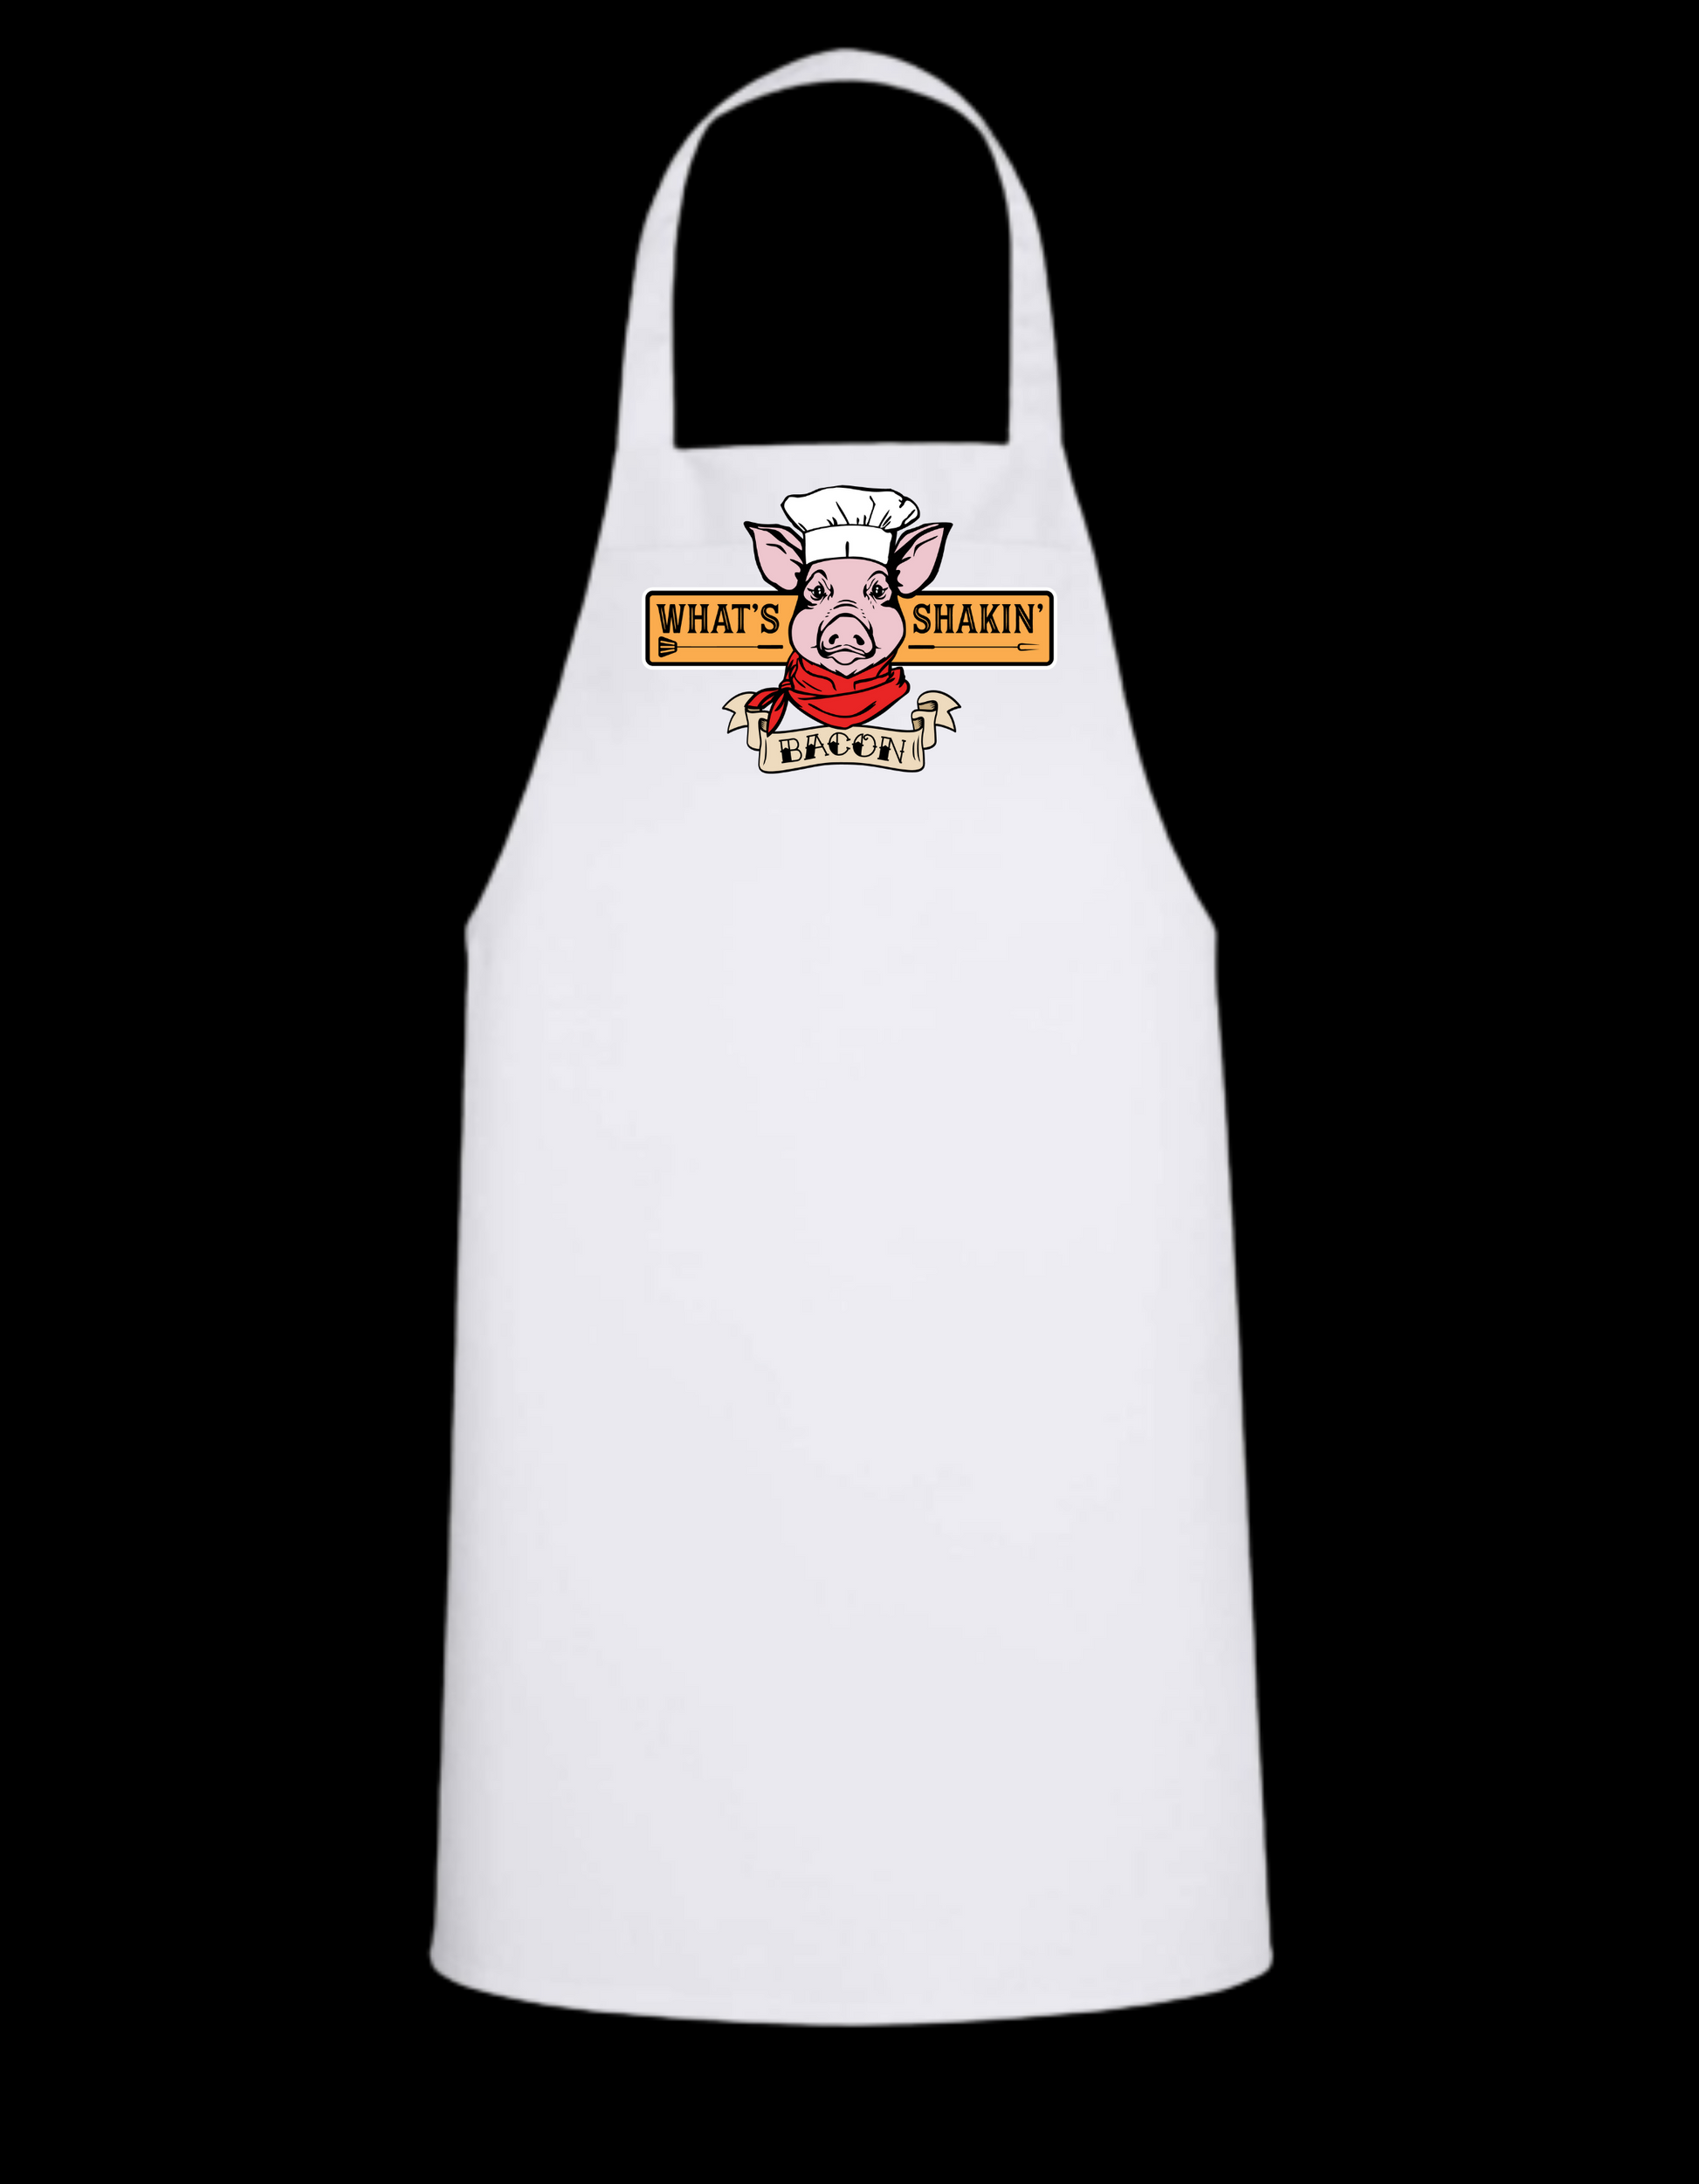 What's Shakin' Bacon - White Apron with Color design Great Gift - Mister Snarky's